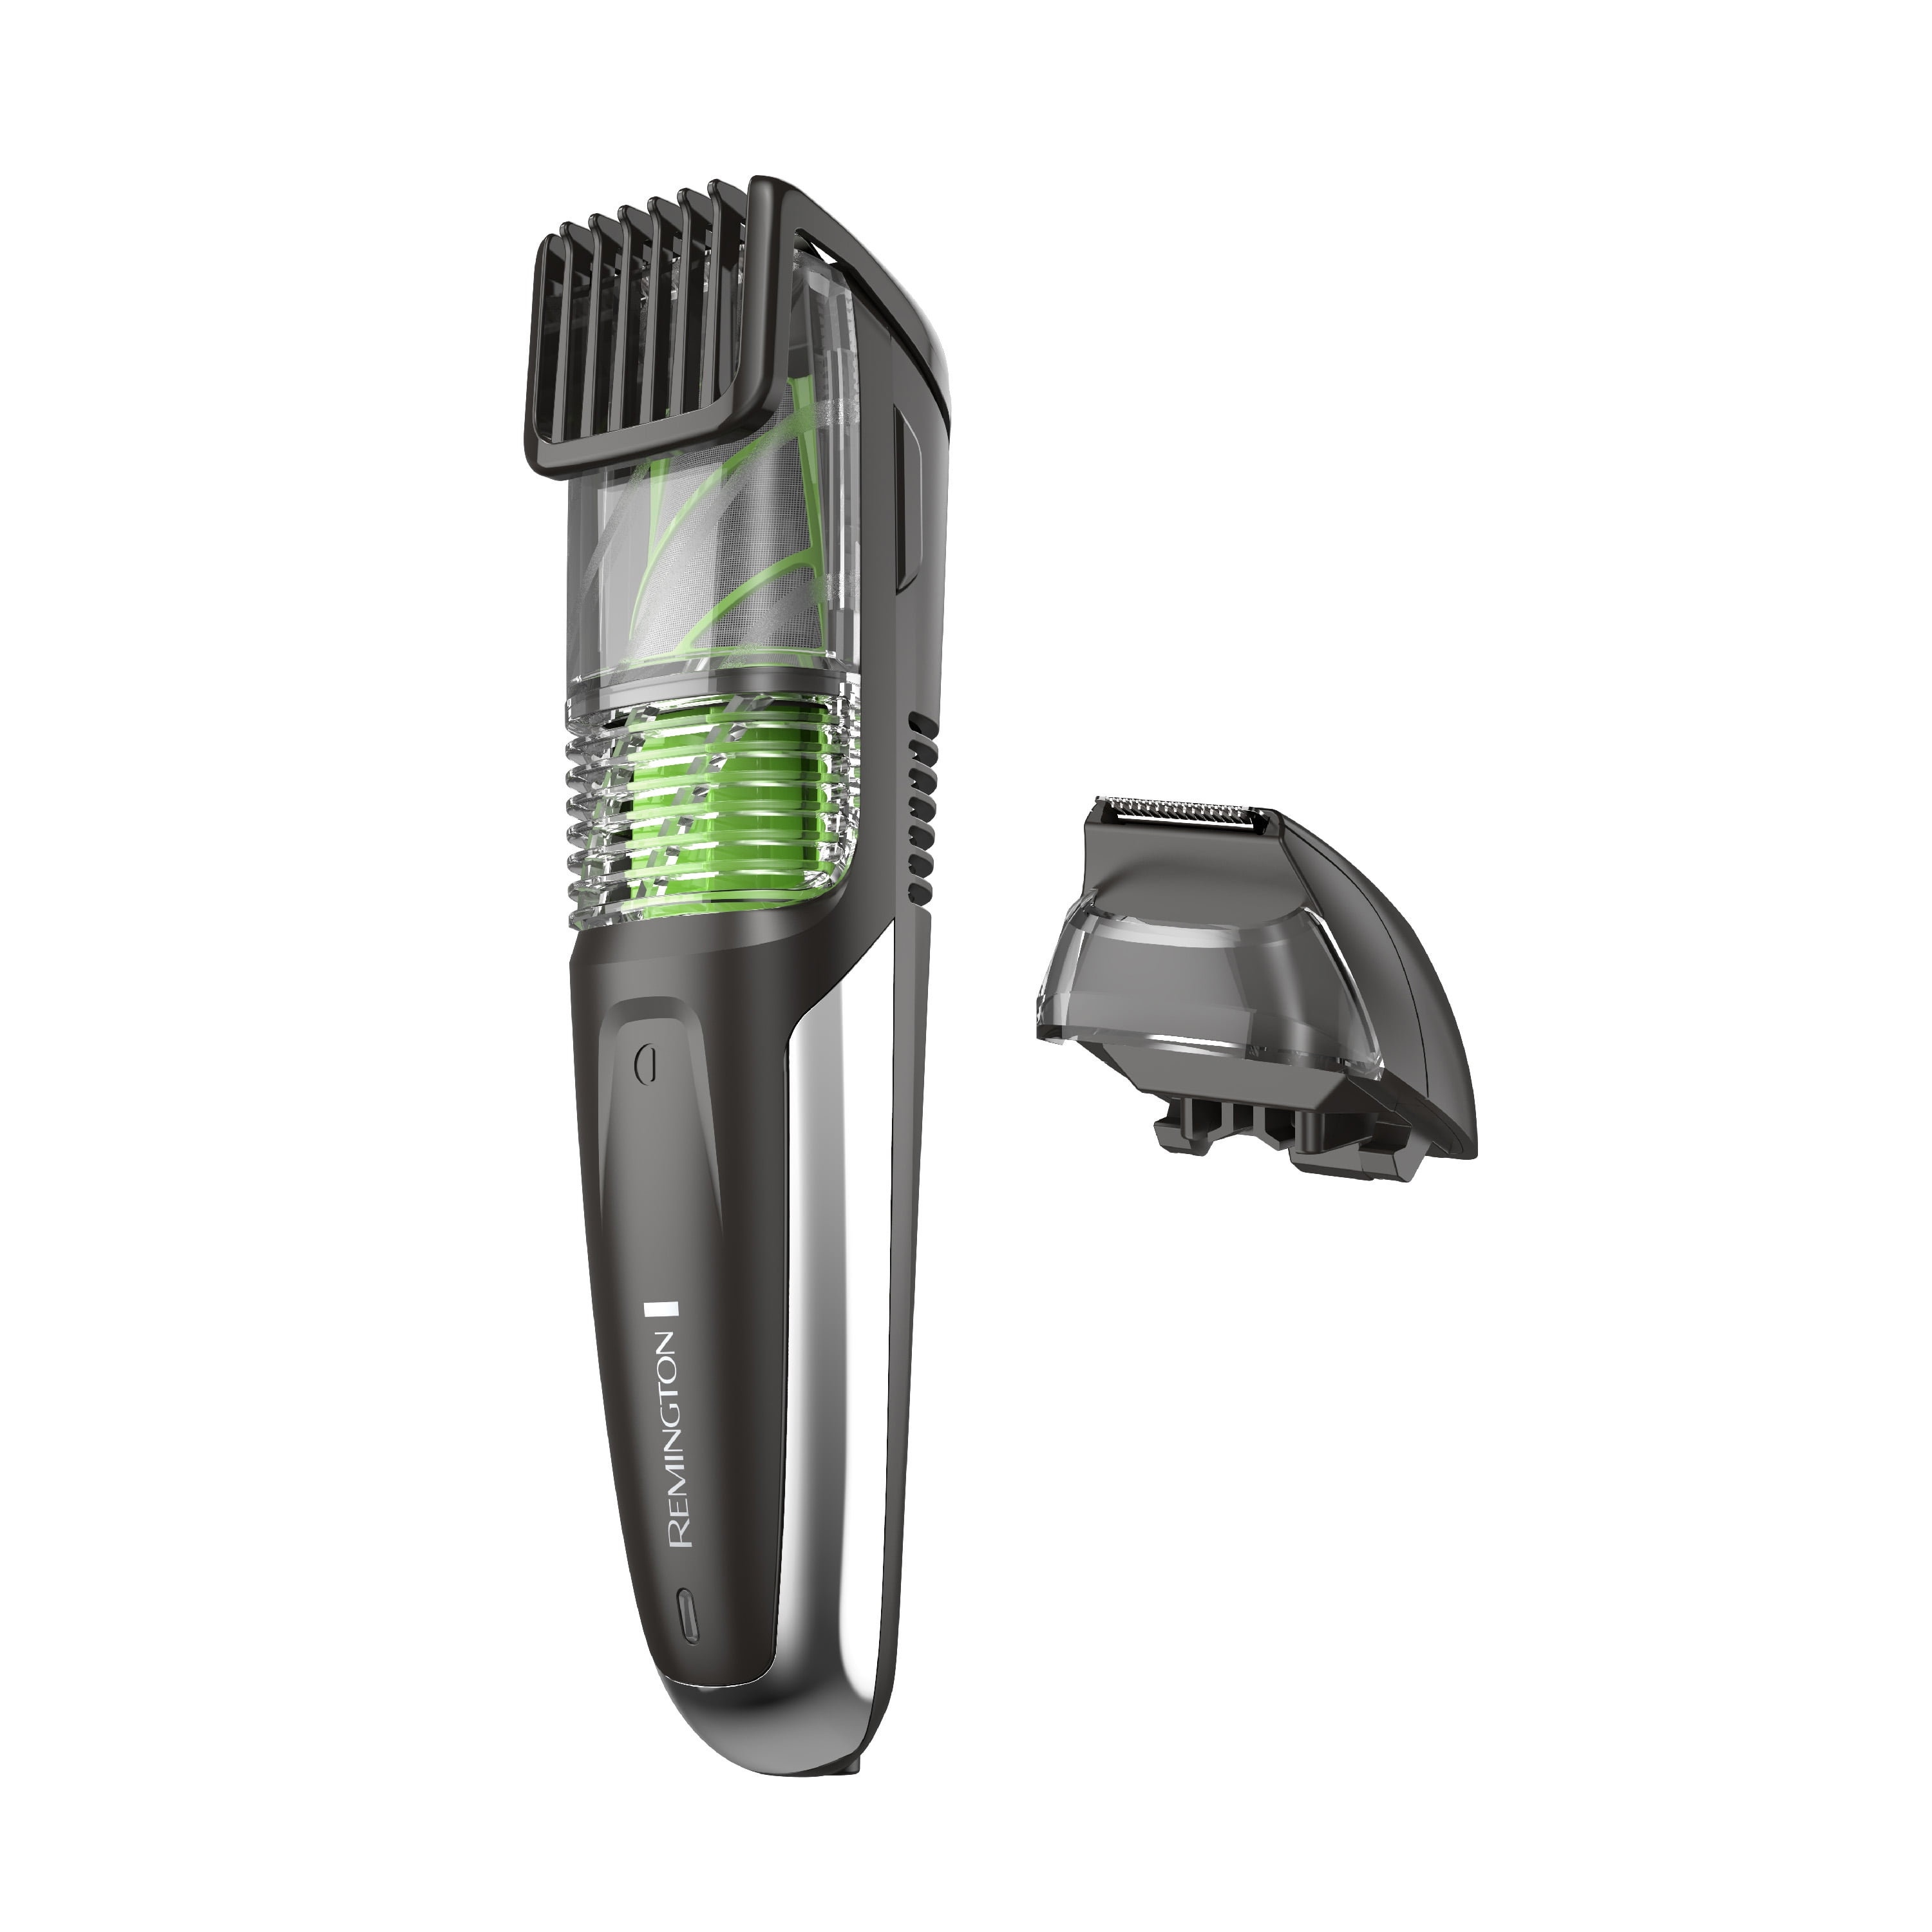 Remington Vacuum Beard and Stubble Trimmer Black MB6850 | Today